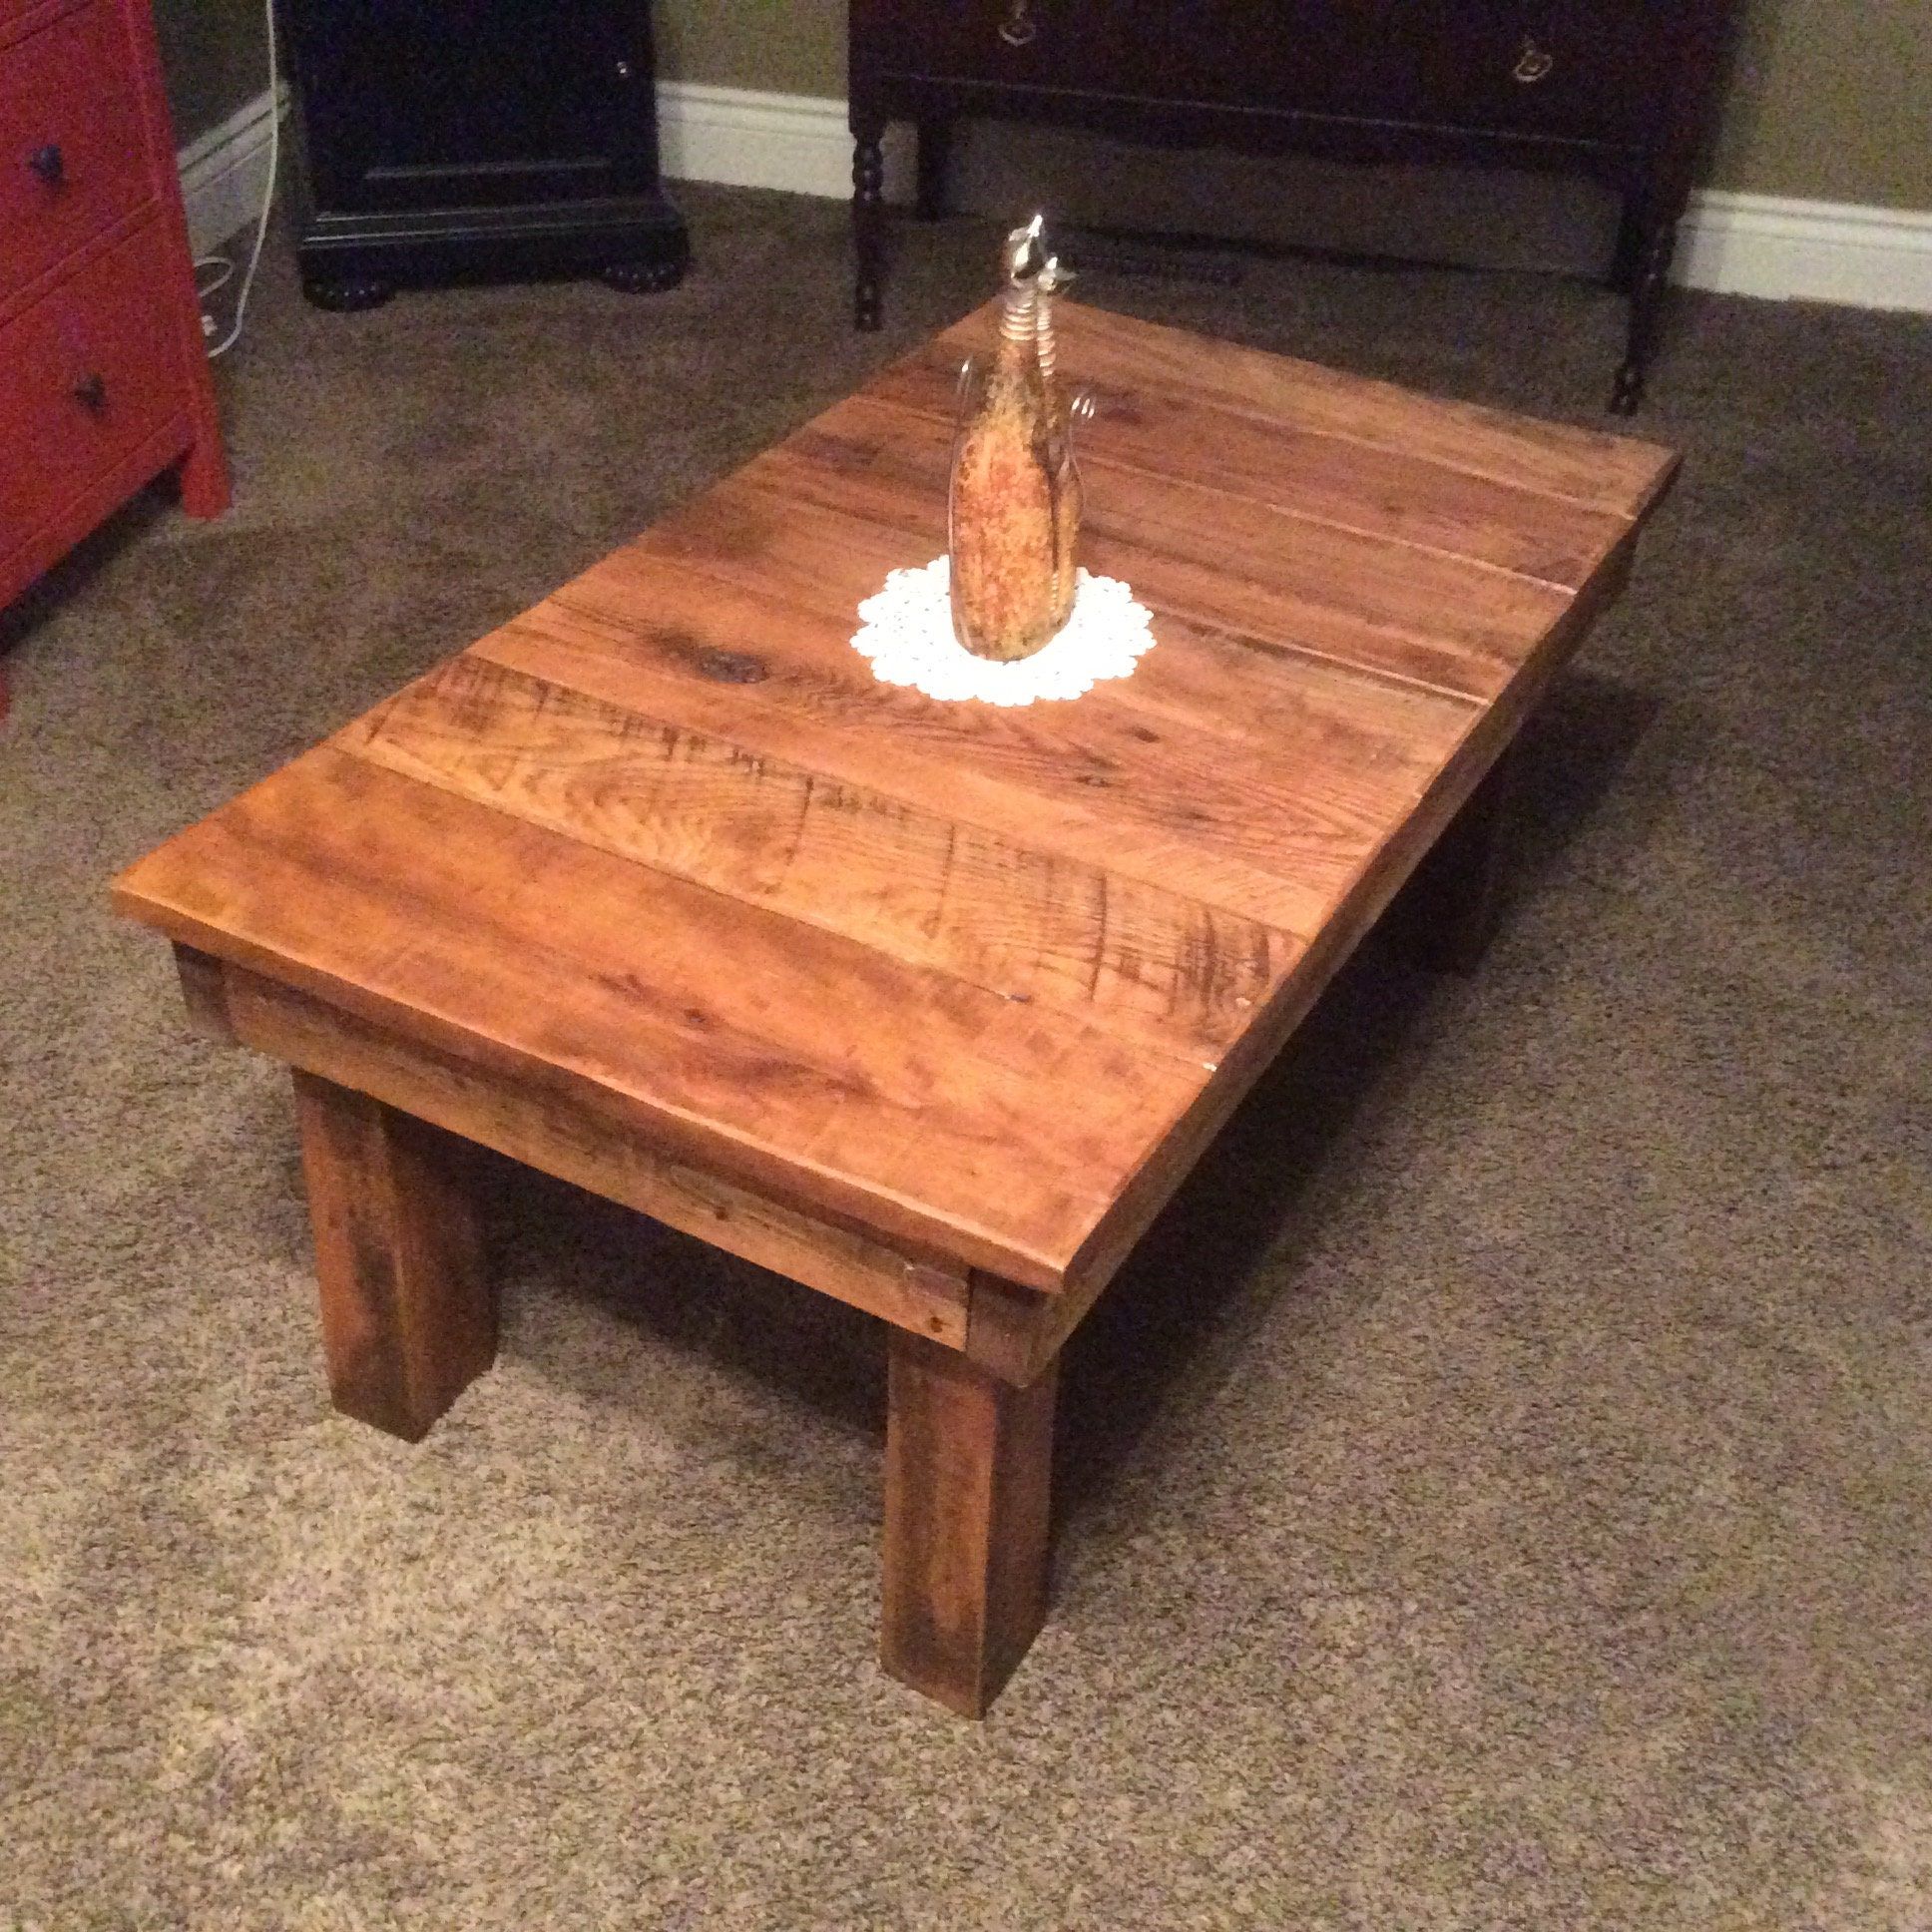 Reclaimed Wood Rustic Coffee Table With Most Popular Barnwood Coffee Tables (Gallery 4 of 20)